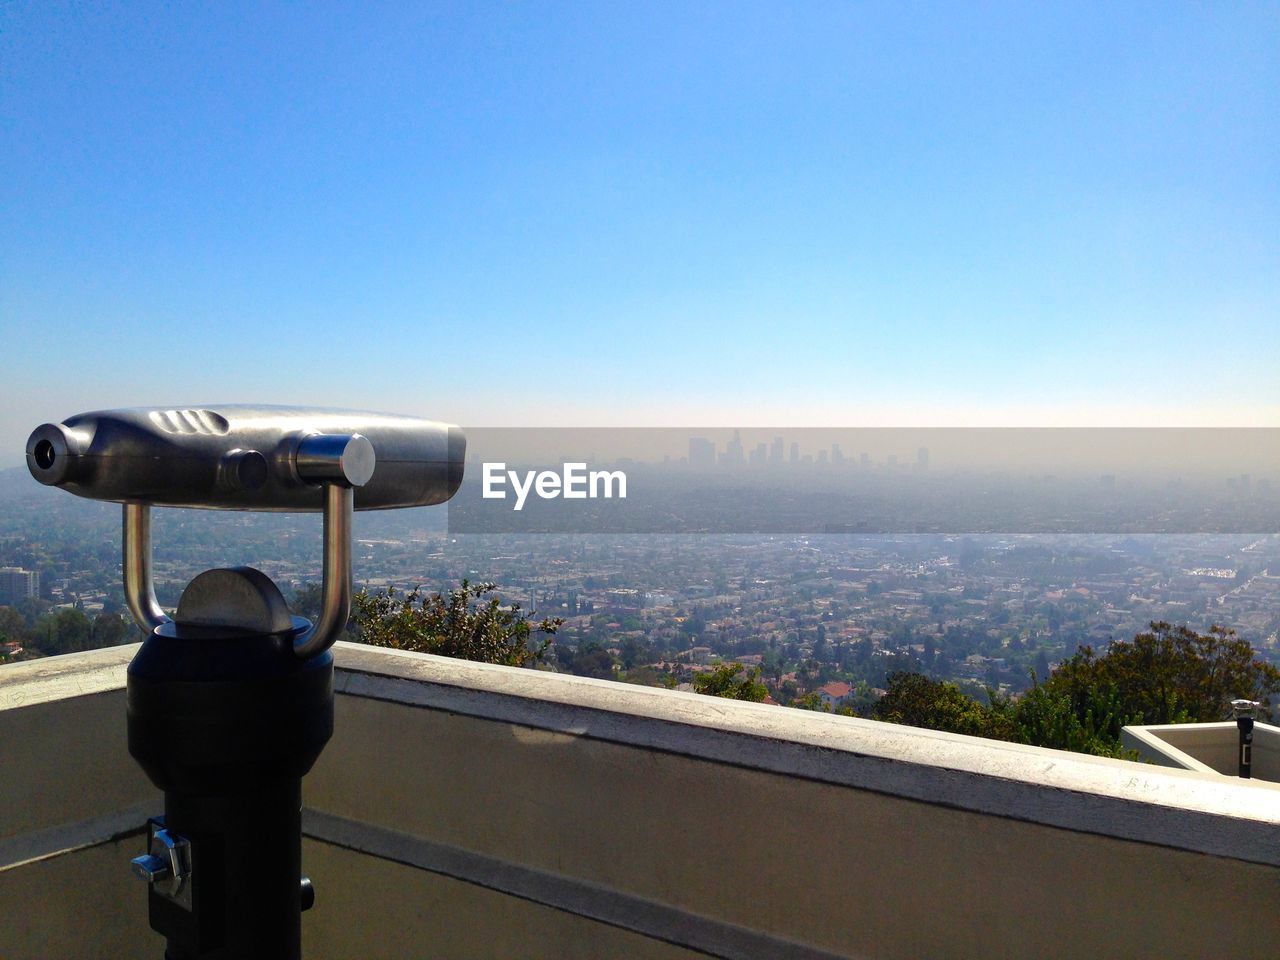 Coin-operated binoculars at griffith park observatory